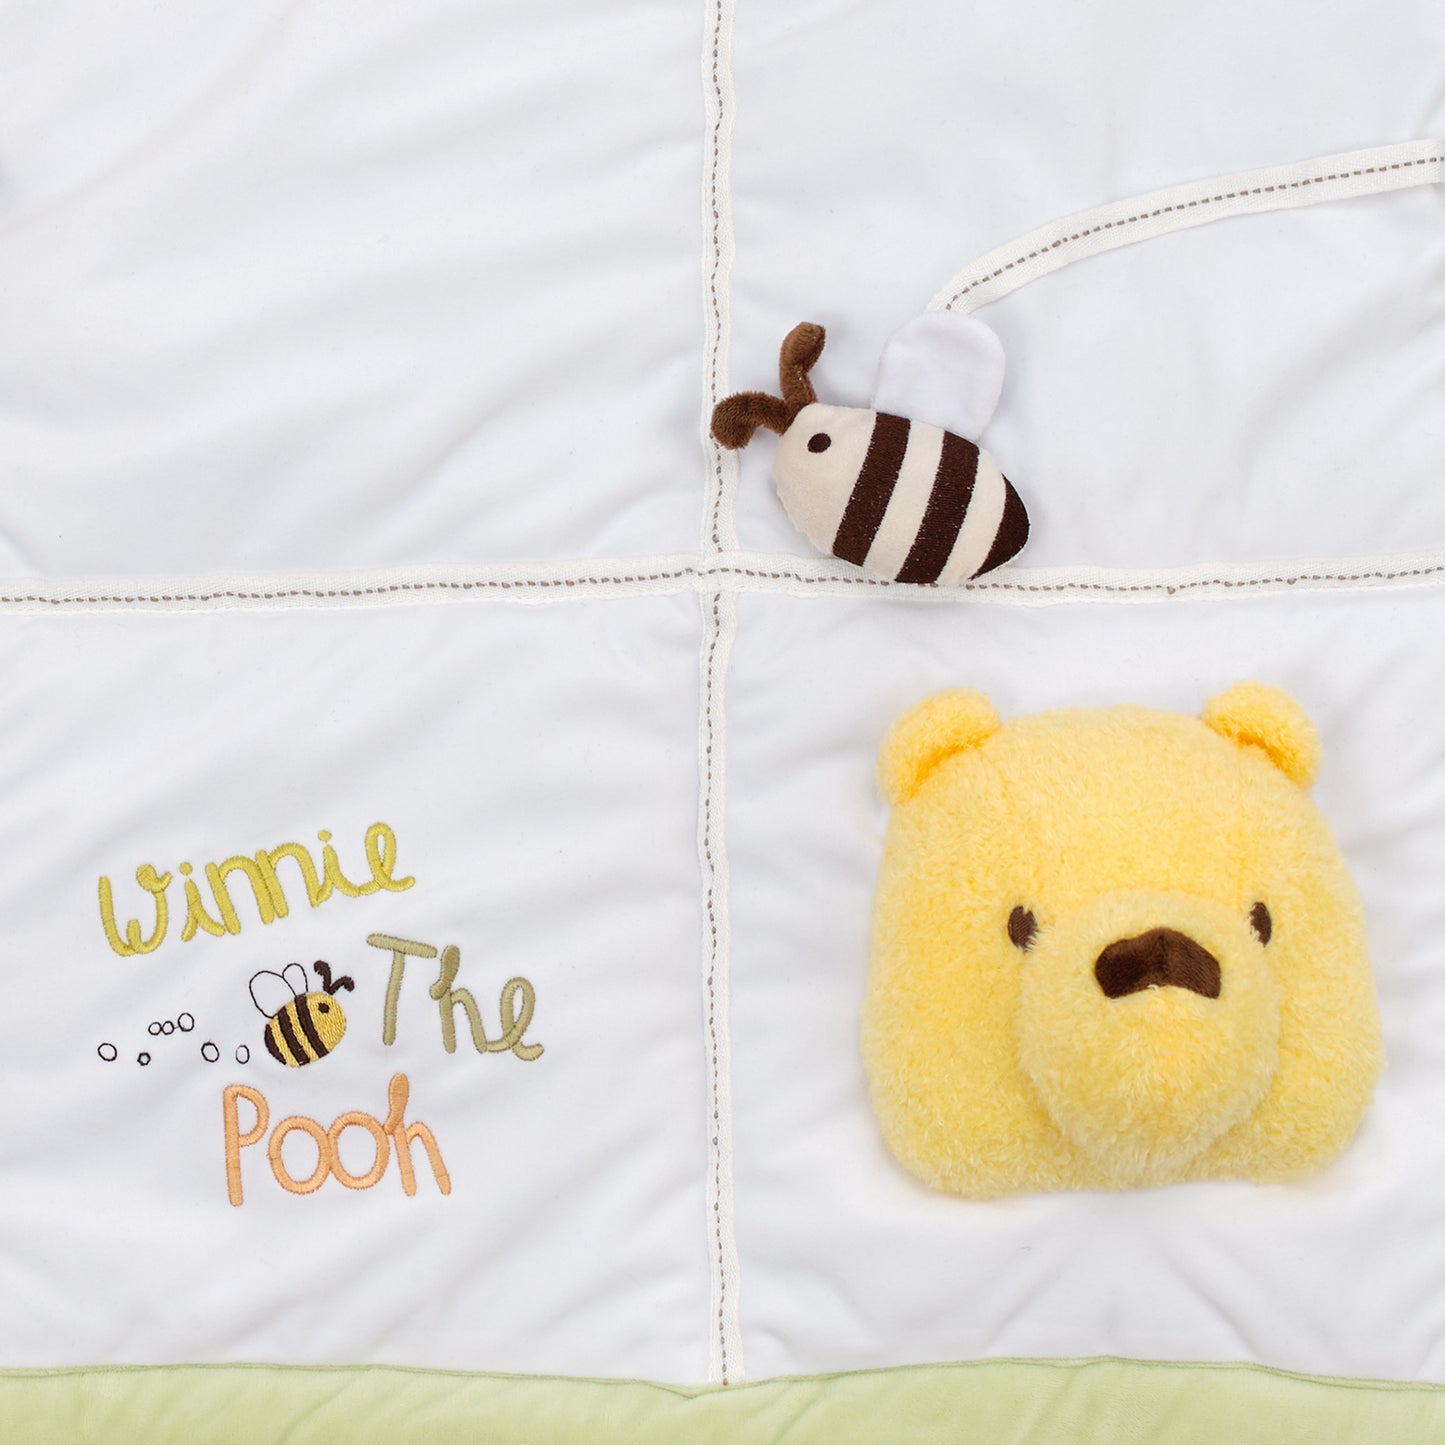 Disney Classic Winnie the Pooh Green and White, Hunny Pot and Bee's, Piglet, Tigger and Eeyore Tummy Time Play Mat - Squeaker, Crinkles and Chimes